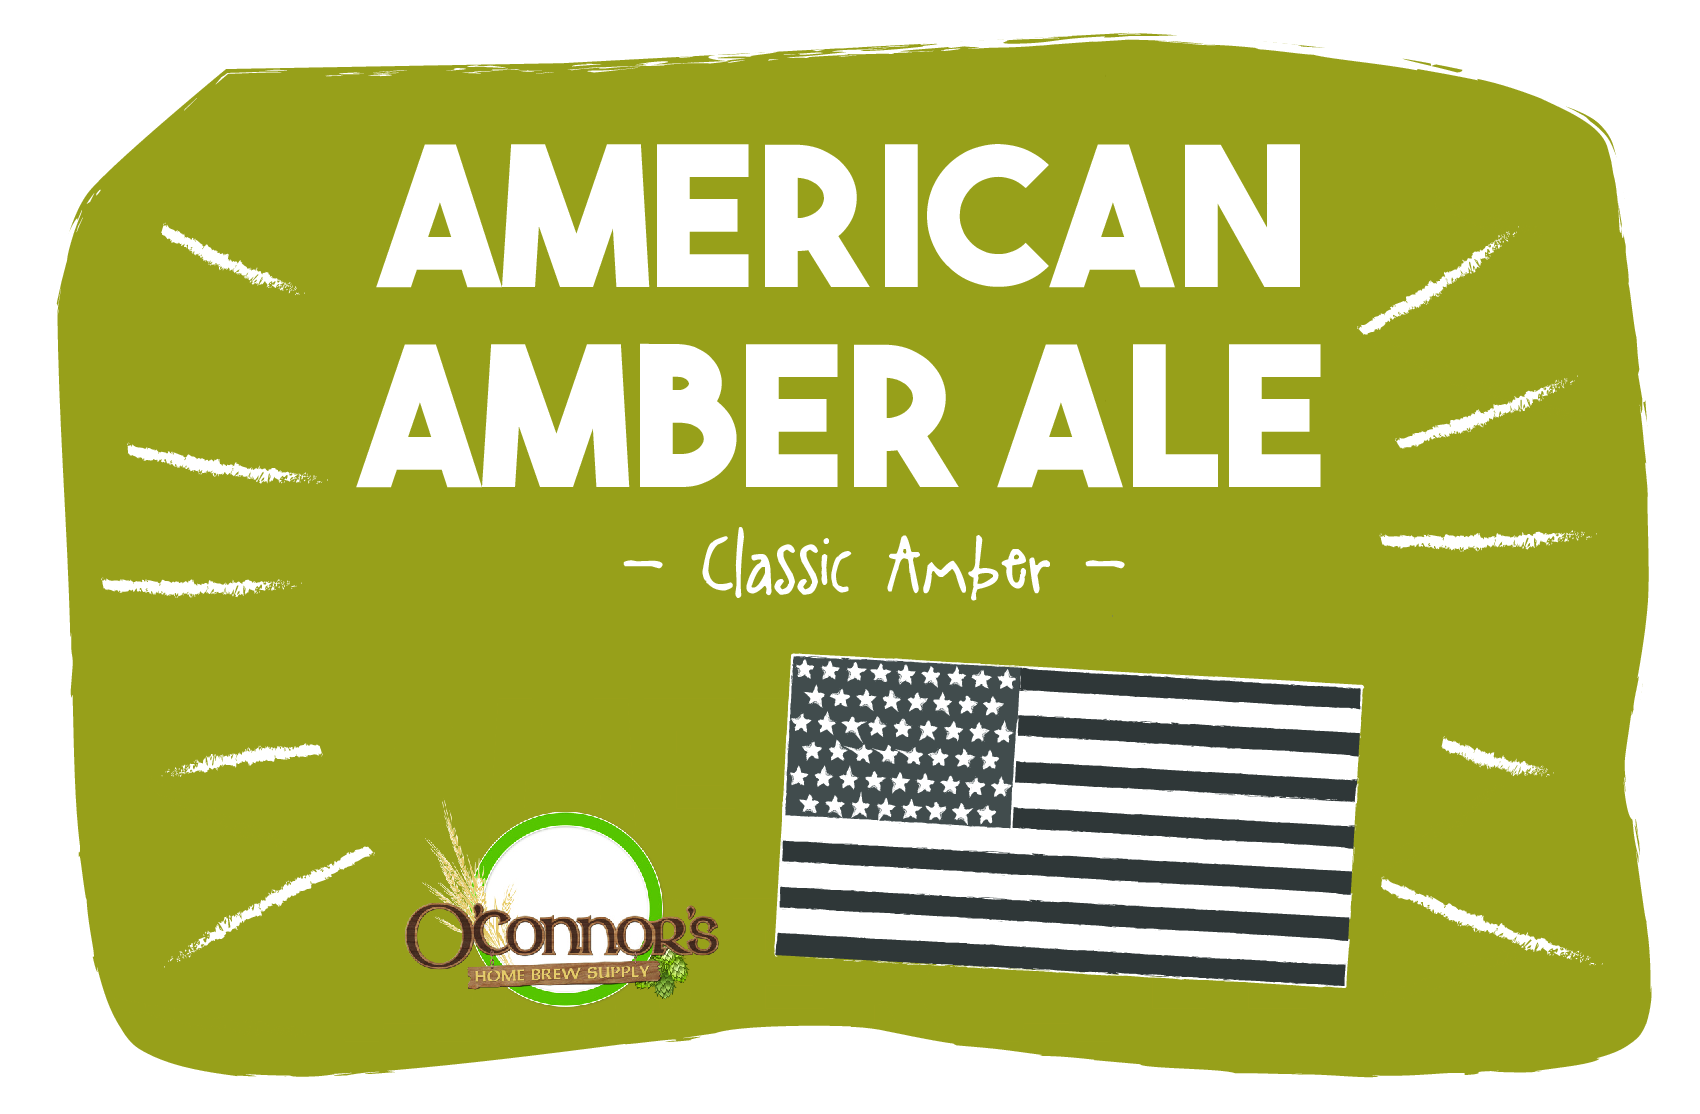 OConnors Home Brew Supply American Amber Ale